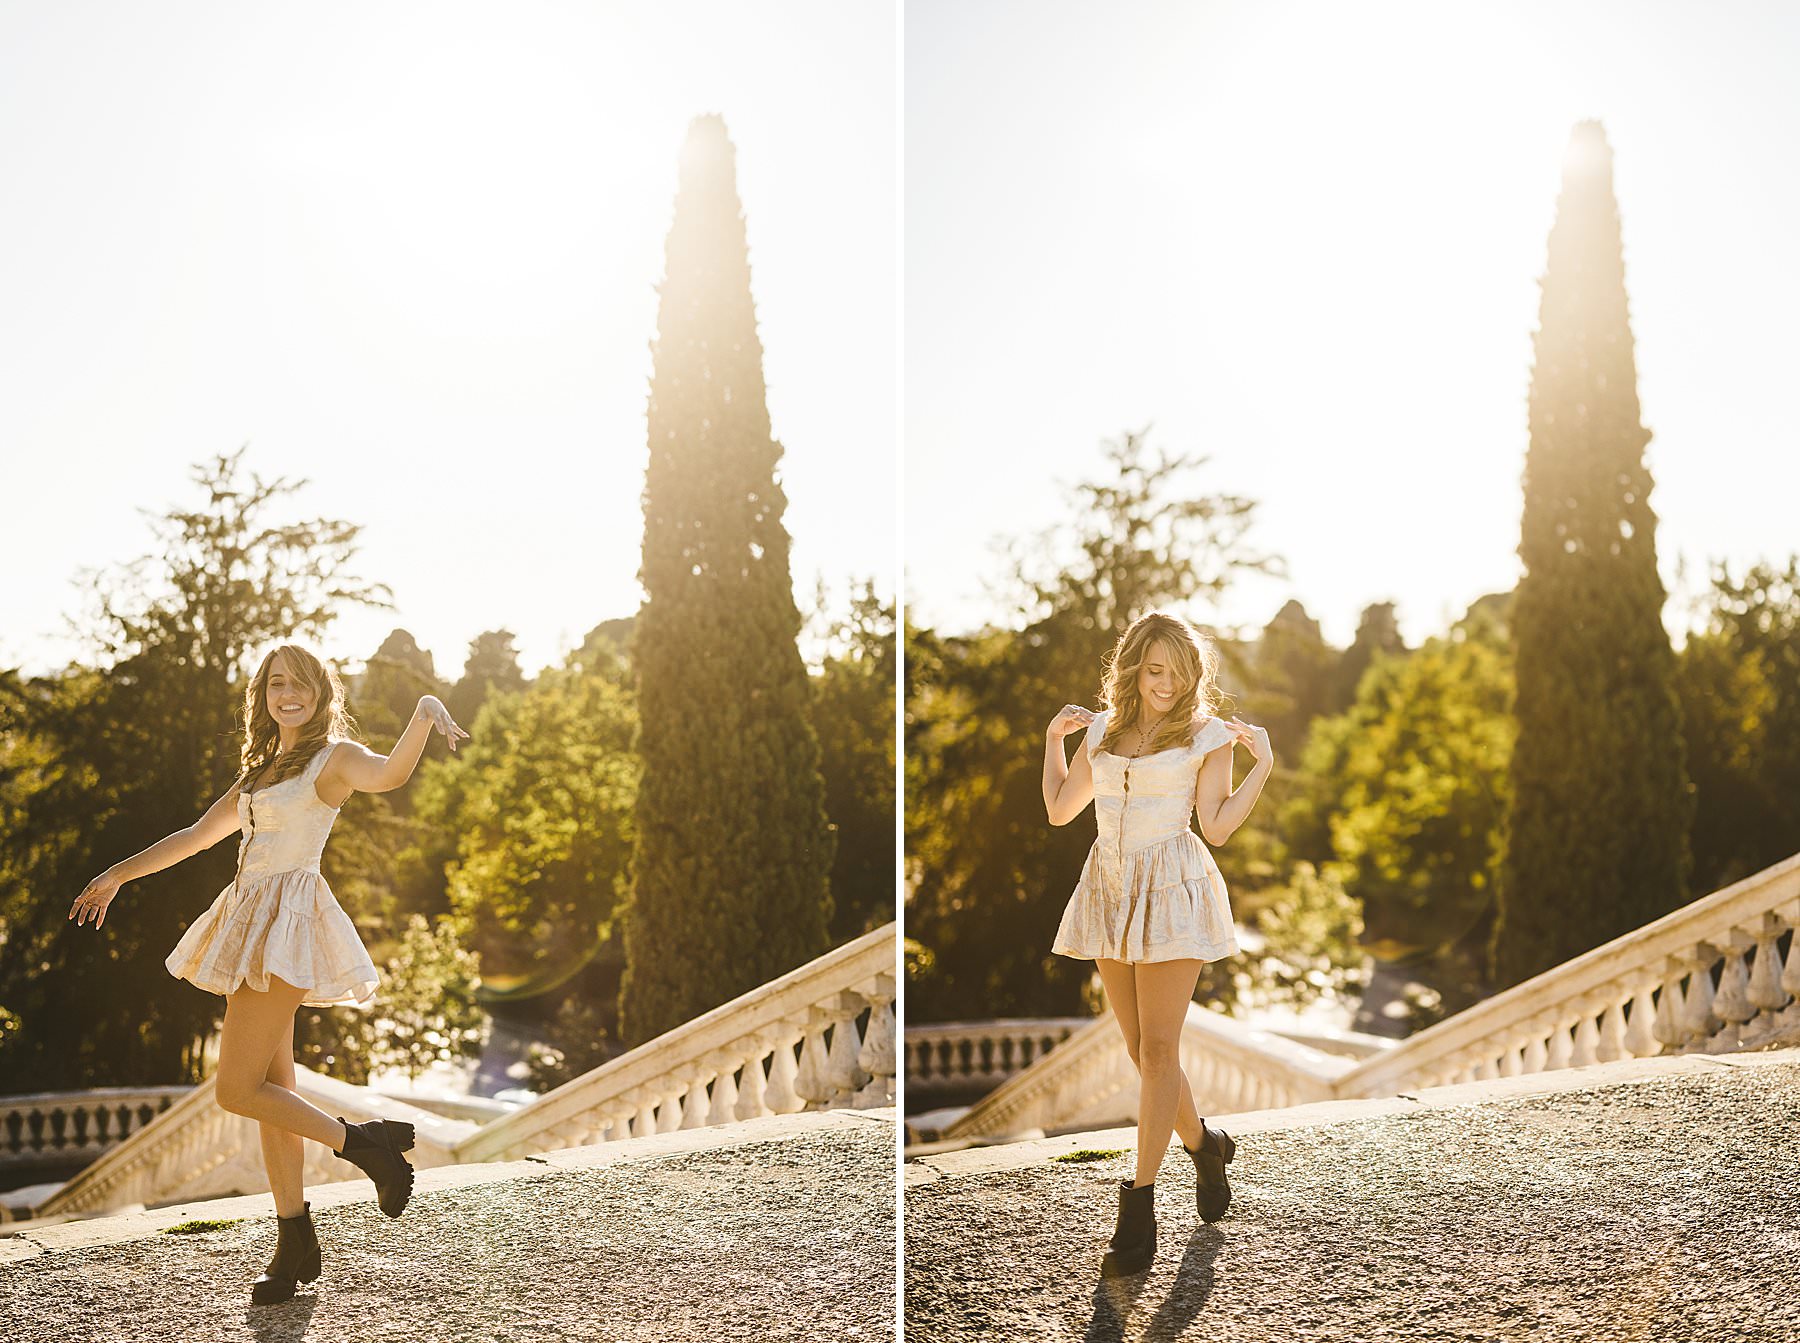 Creative and modern portrait photo shoot in Florence, Italy